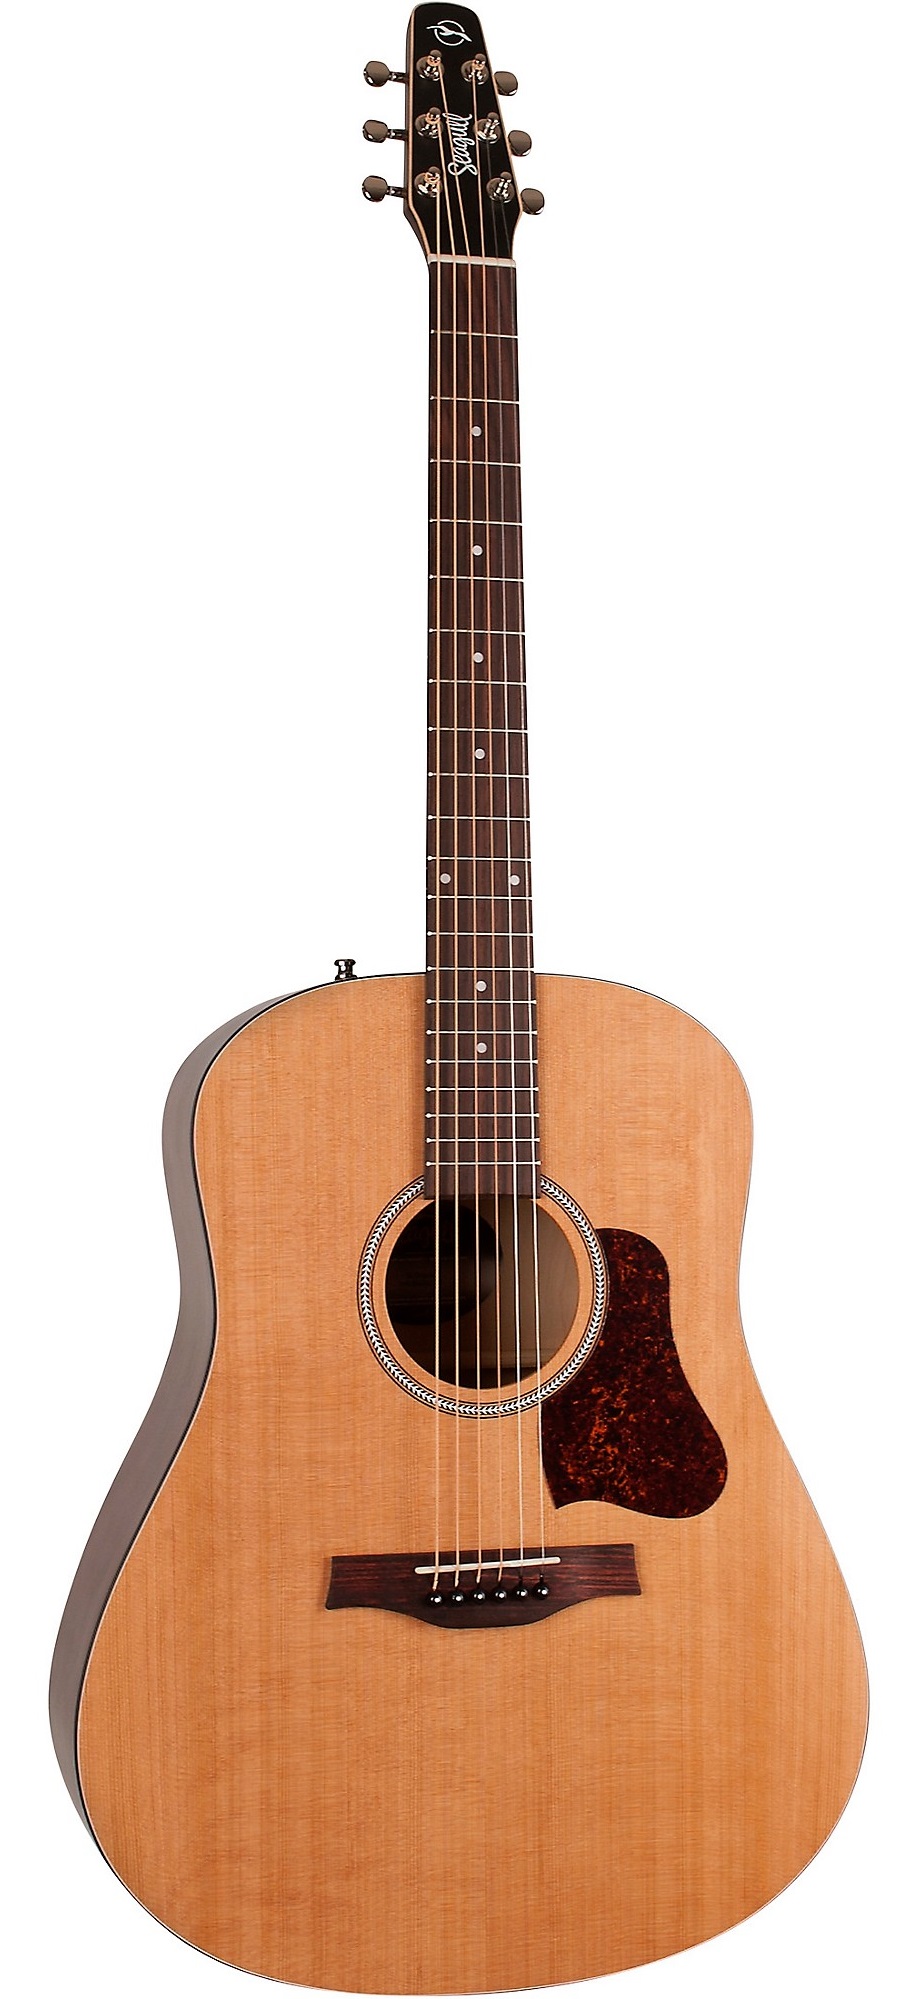 Seagull S6 Original Acoustic Guitar on a white background